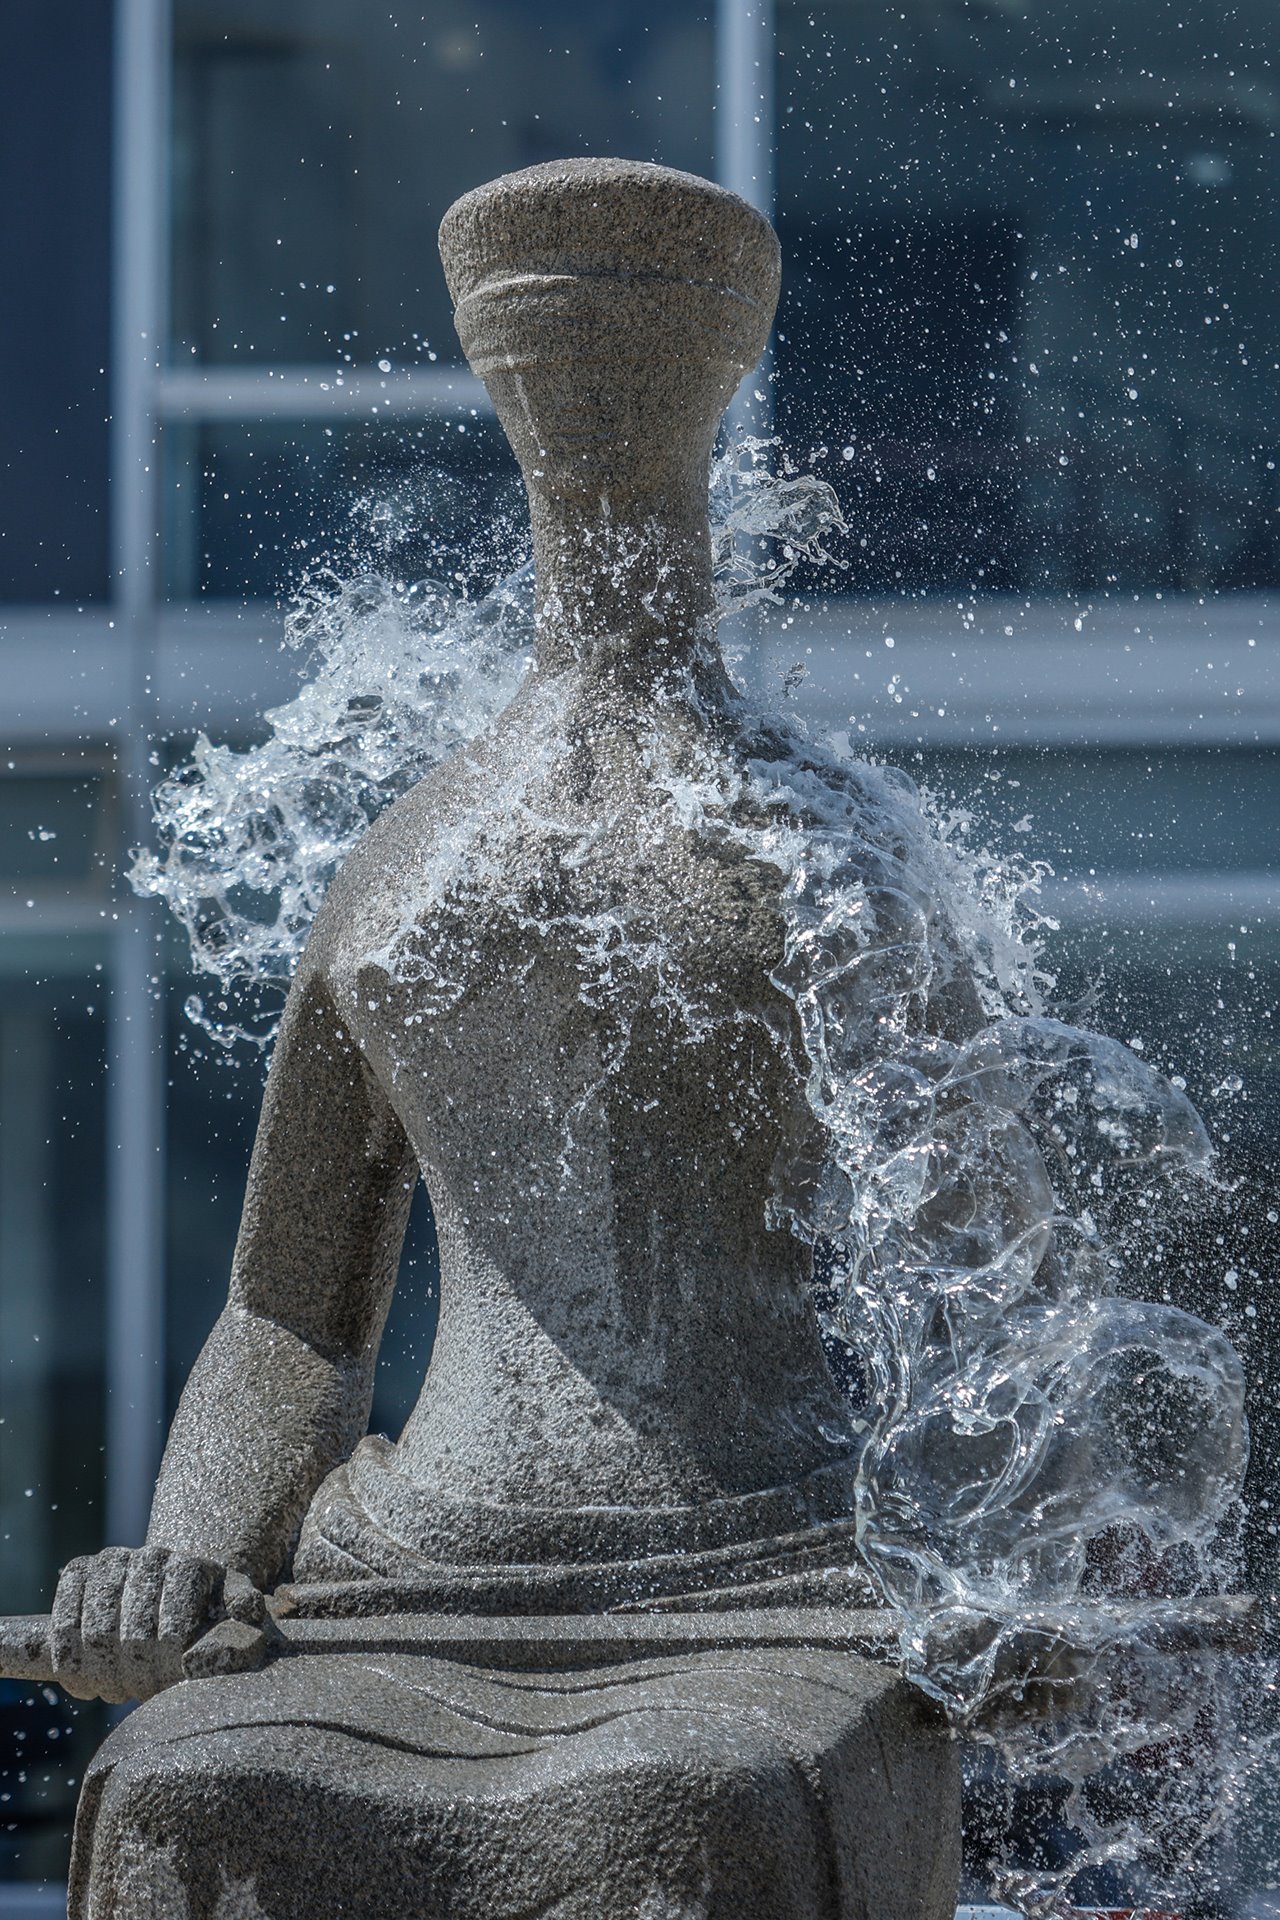 <em>The Justice</em>, a statue by Alfredo Ceschiatti in front of the Brazilian Supreme Court, is washed after being vandalized, in Brasilia, Brazil. Restoration of the federal buildings began after more than a thousand people were arrested in the days following the protests.&nbsp;